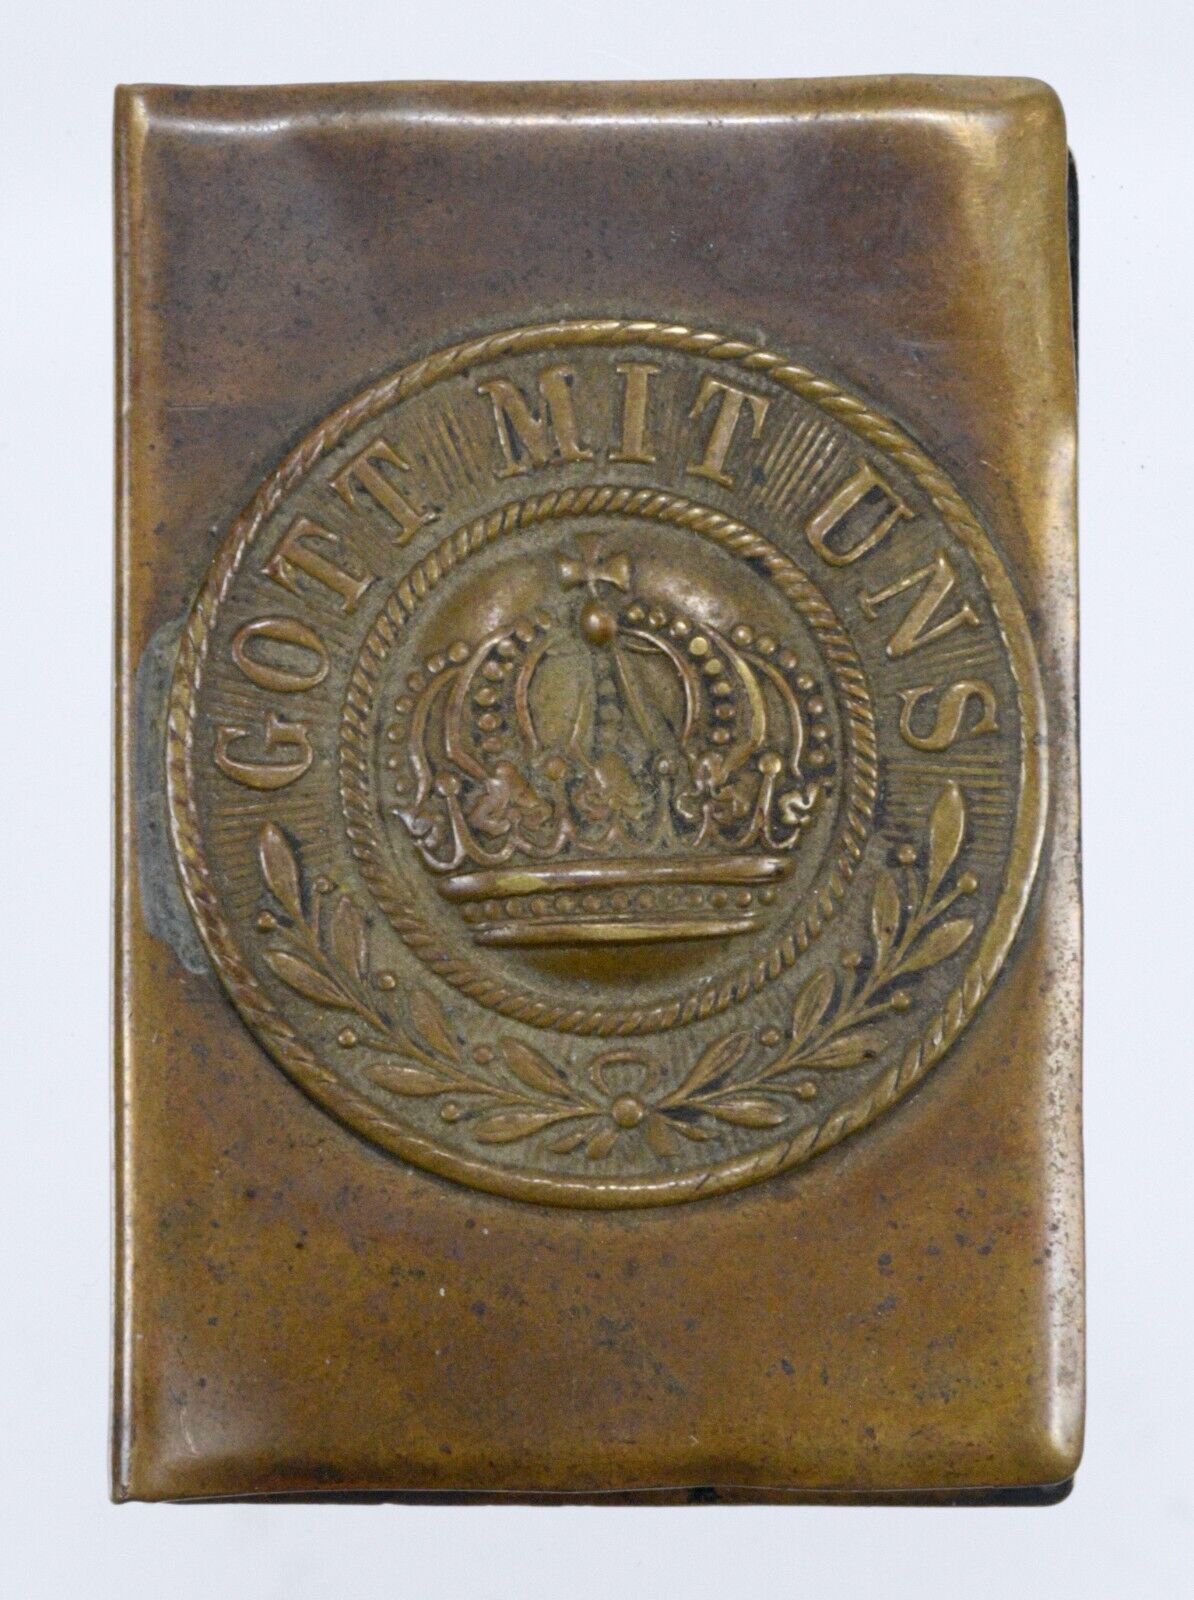 WWI Imperial German Brass Trench Safety Match Box Cover Safe GOTT MIT UNS